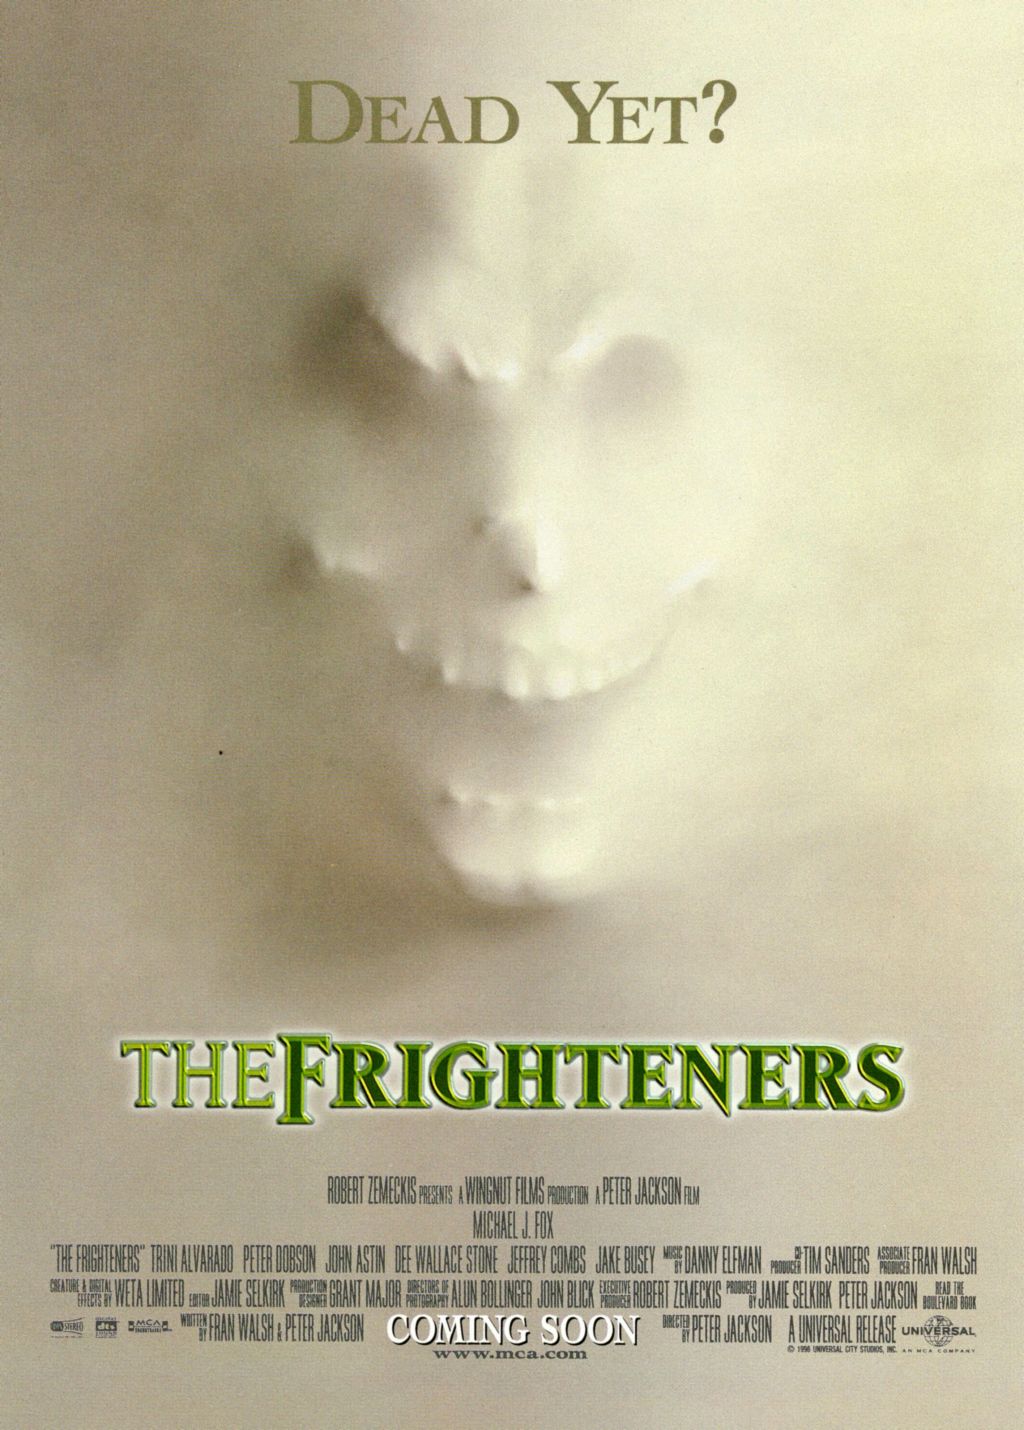 Tremble Ep 174: The Frighteners